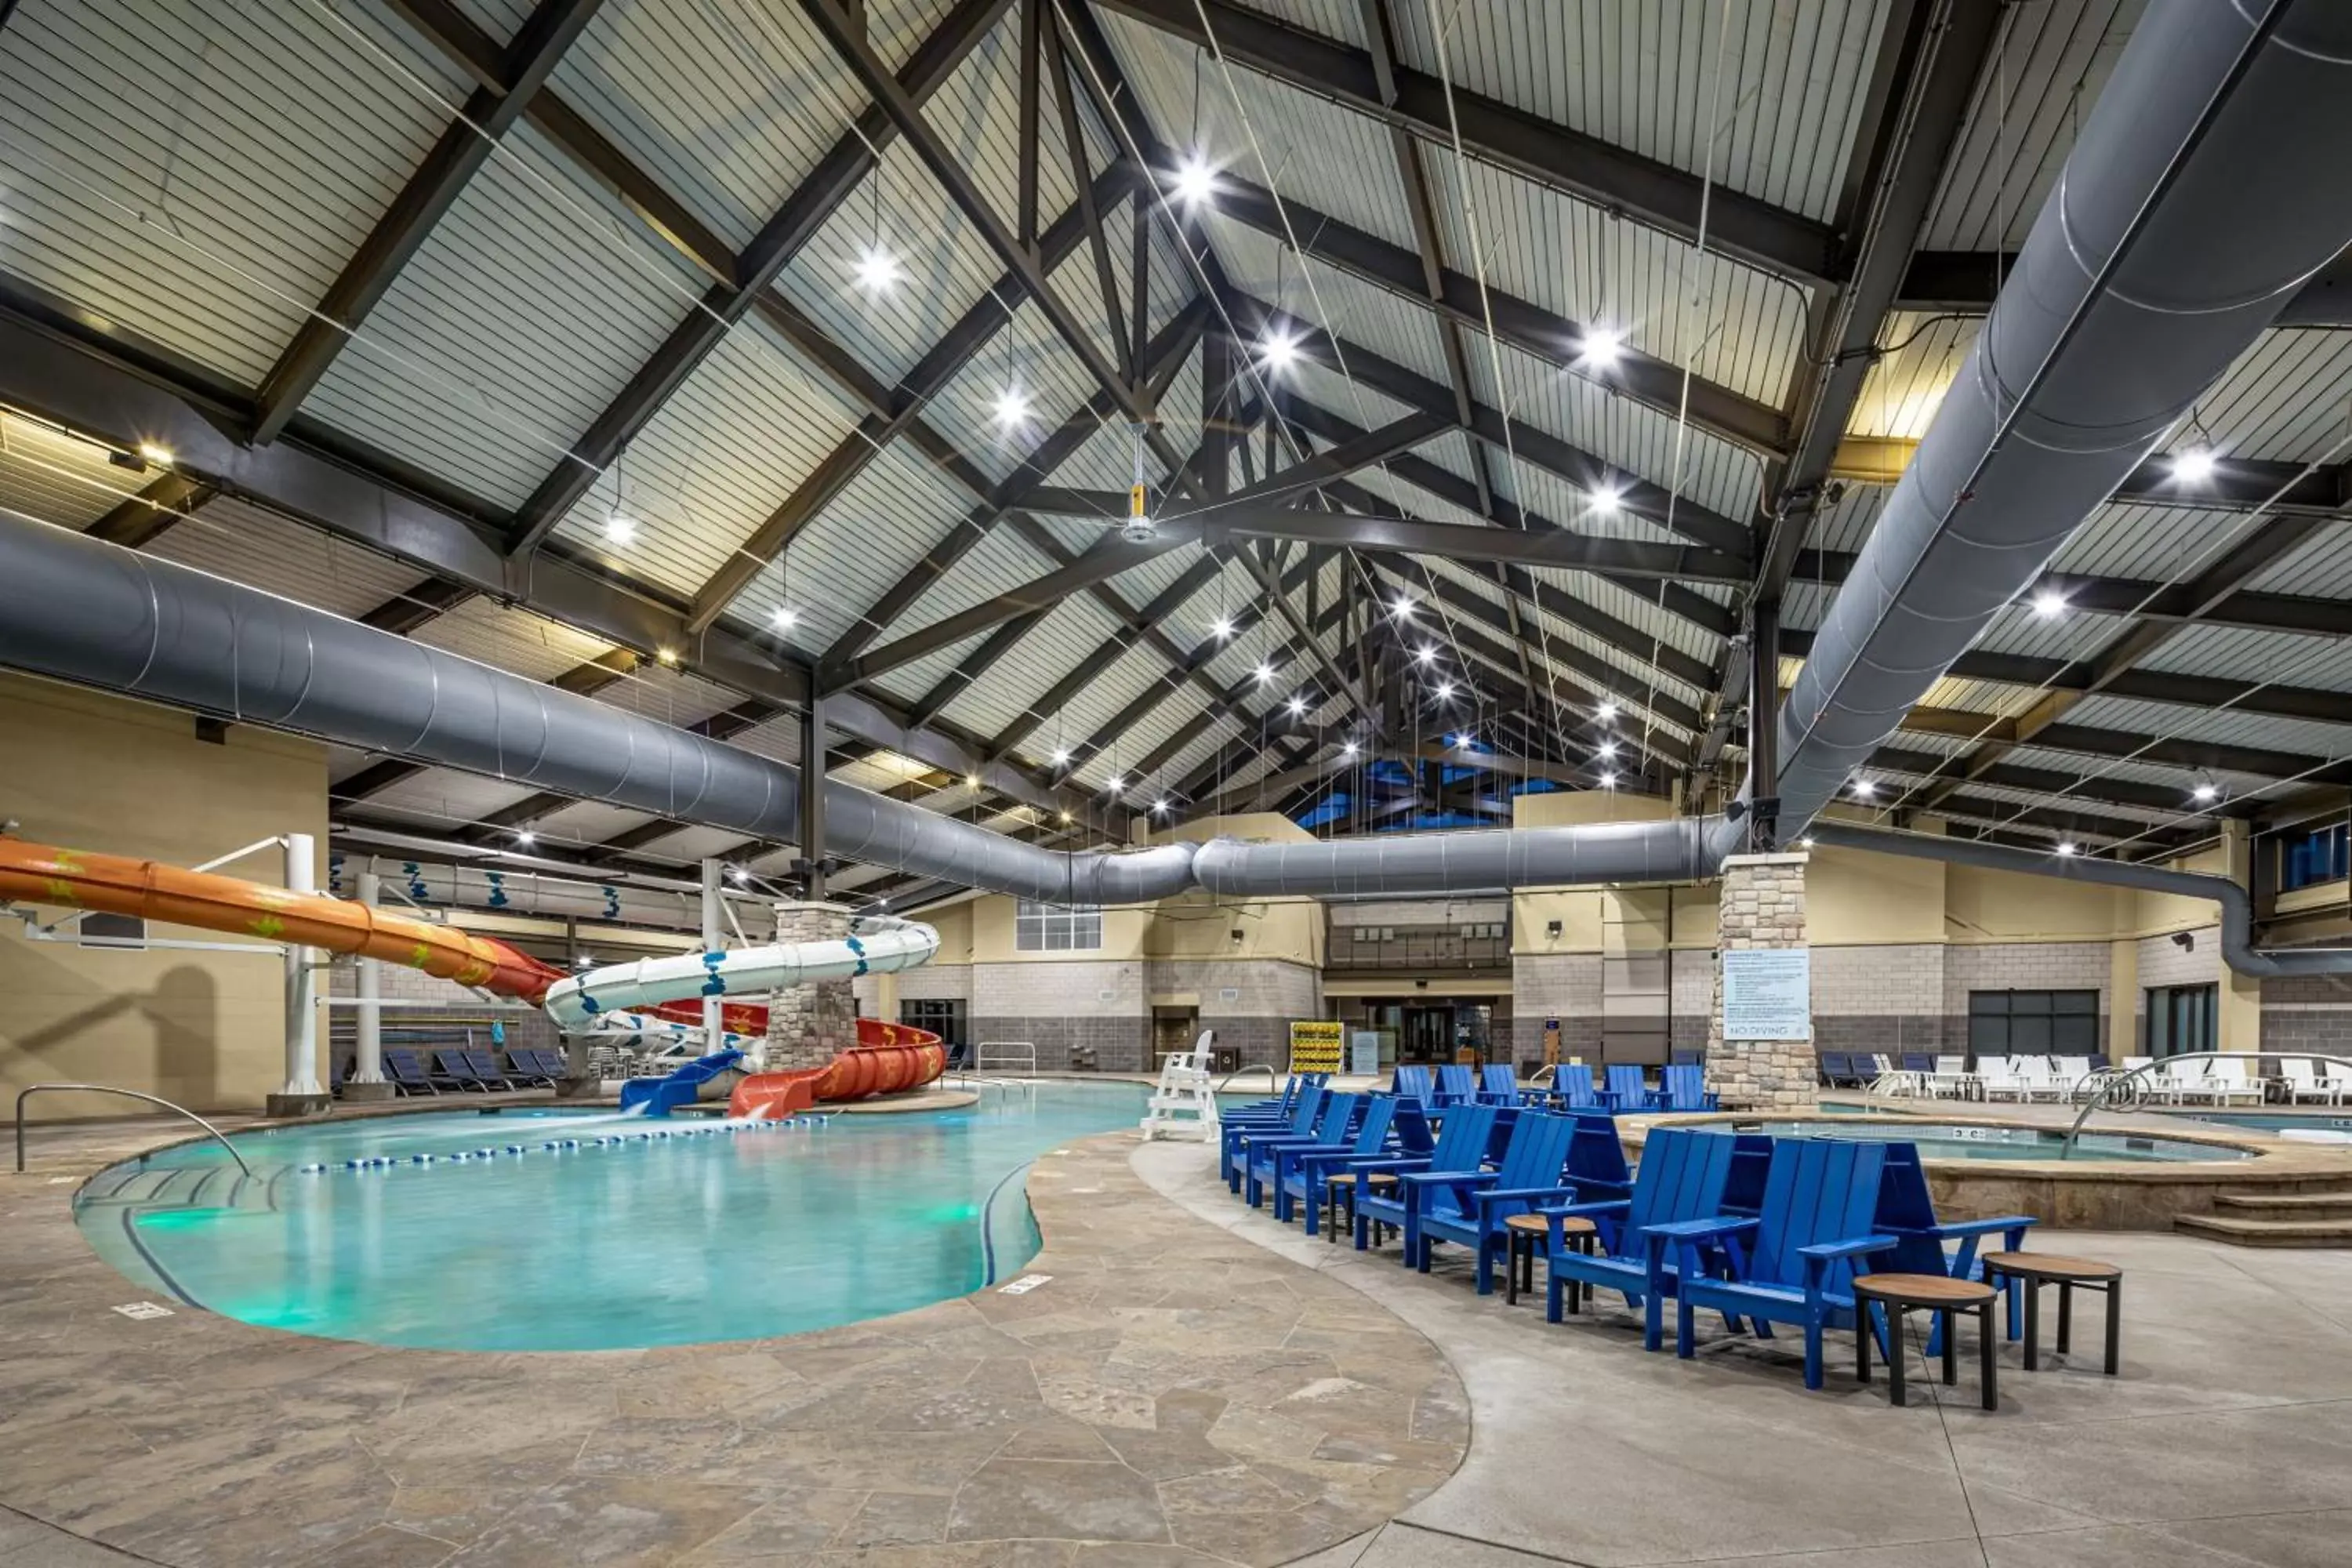 Swimming pool in Gaylord Rockies Resort & Convention Center